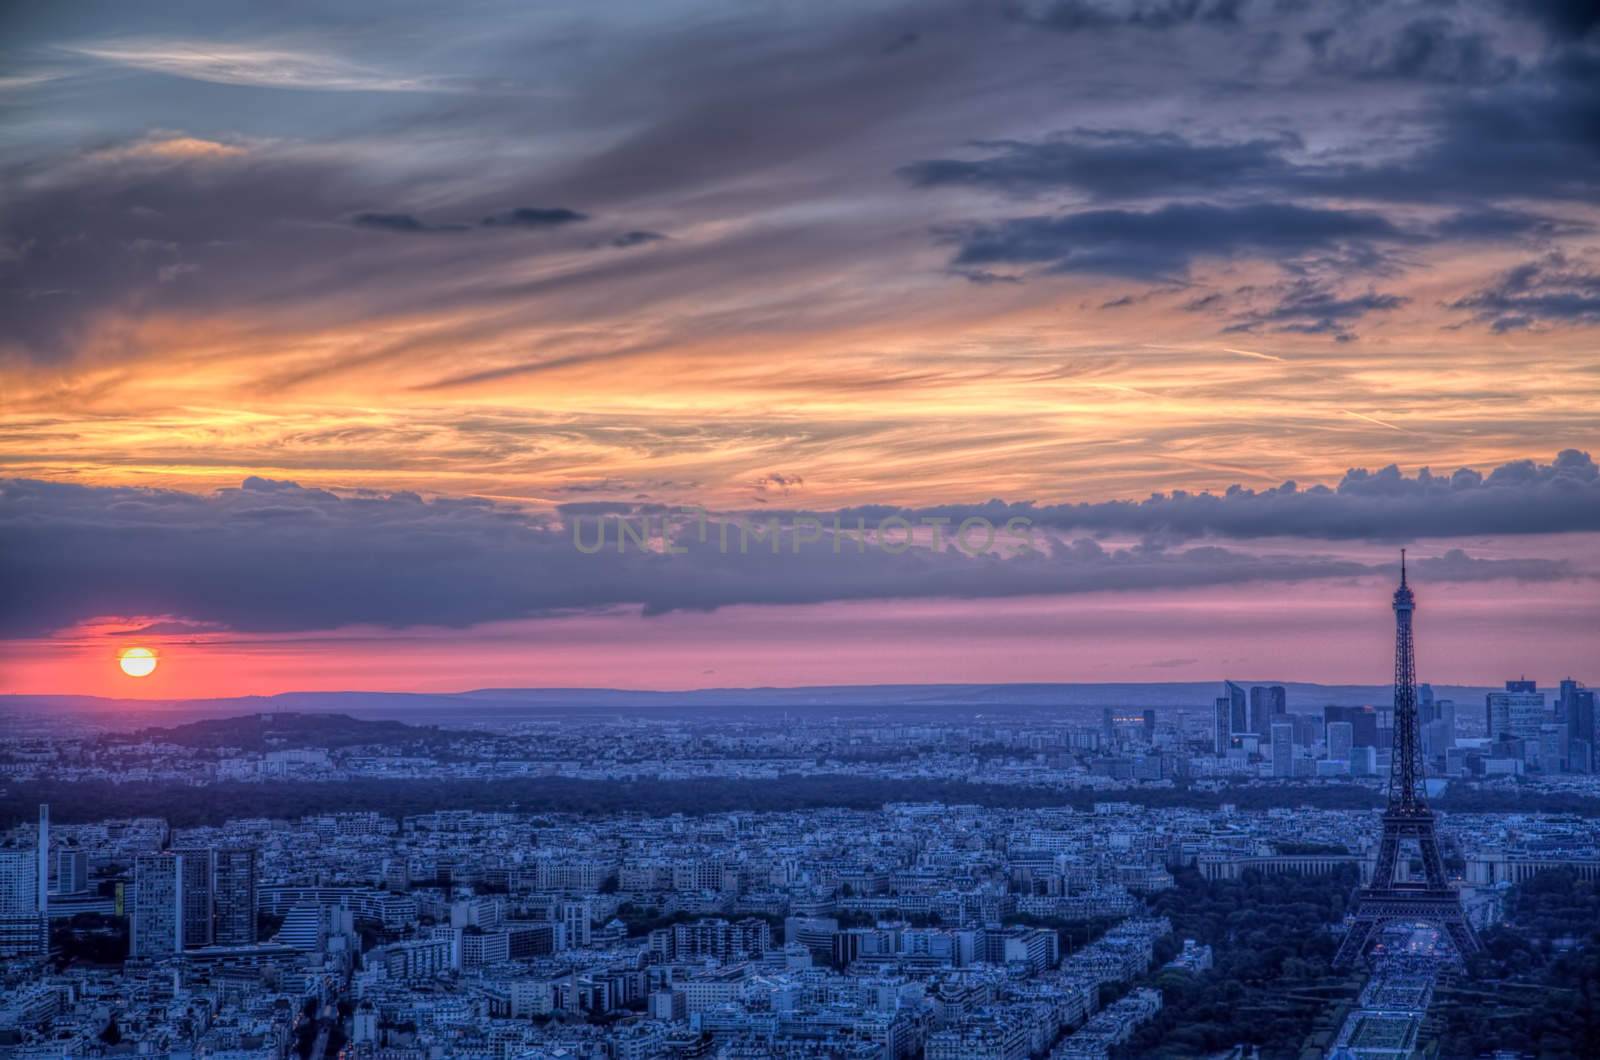 Sunset over Paris by Harvepino